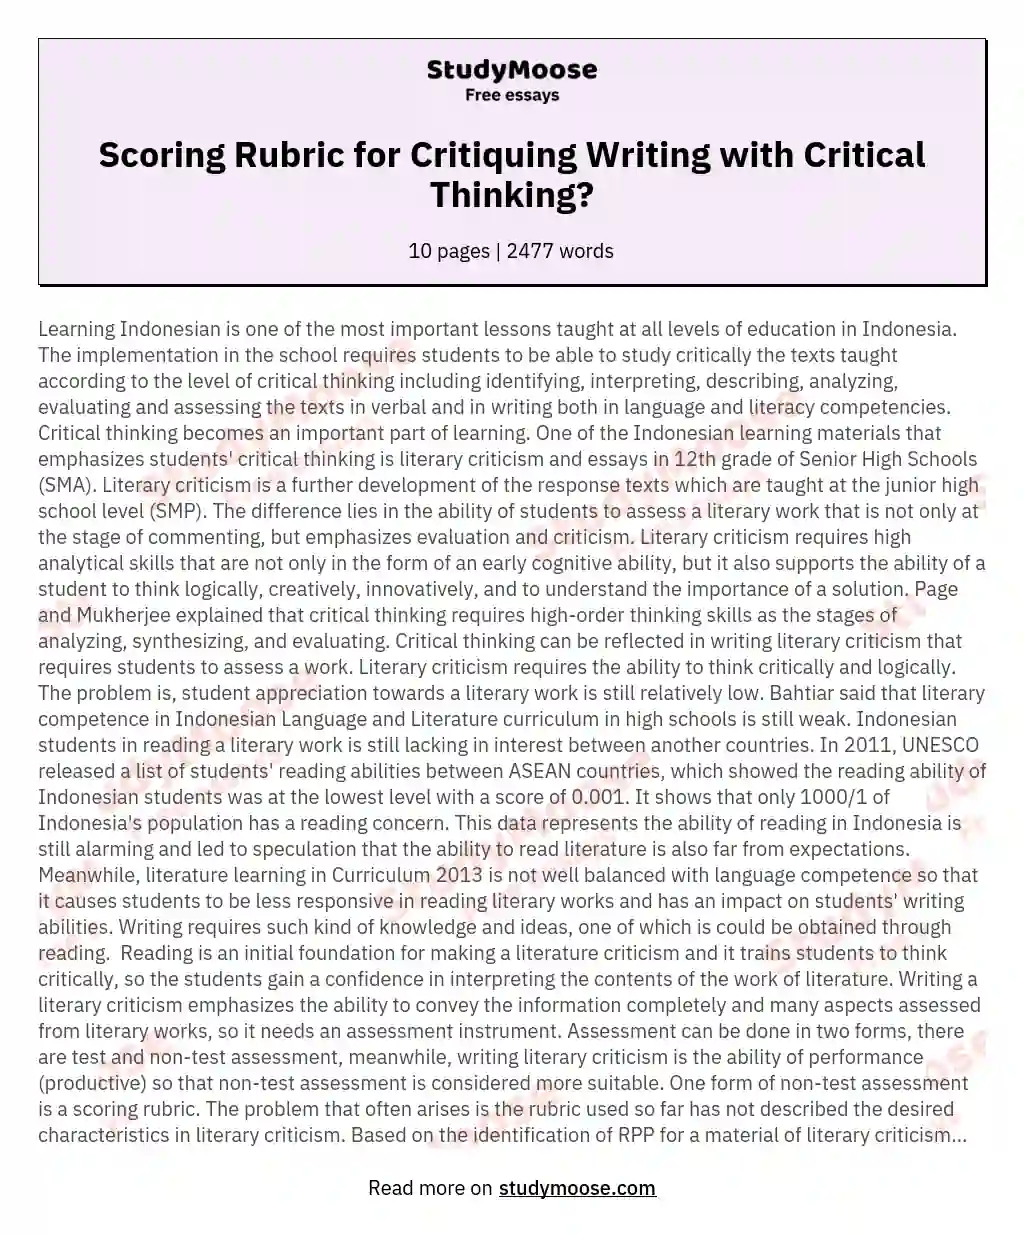 Scoring Rubric for Critiquing Writing with Critical Thinking? essay